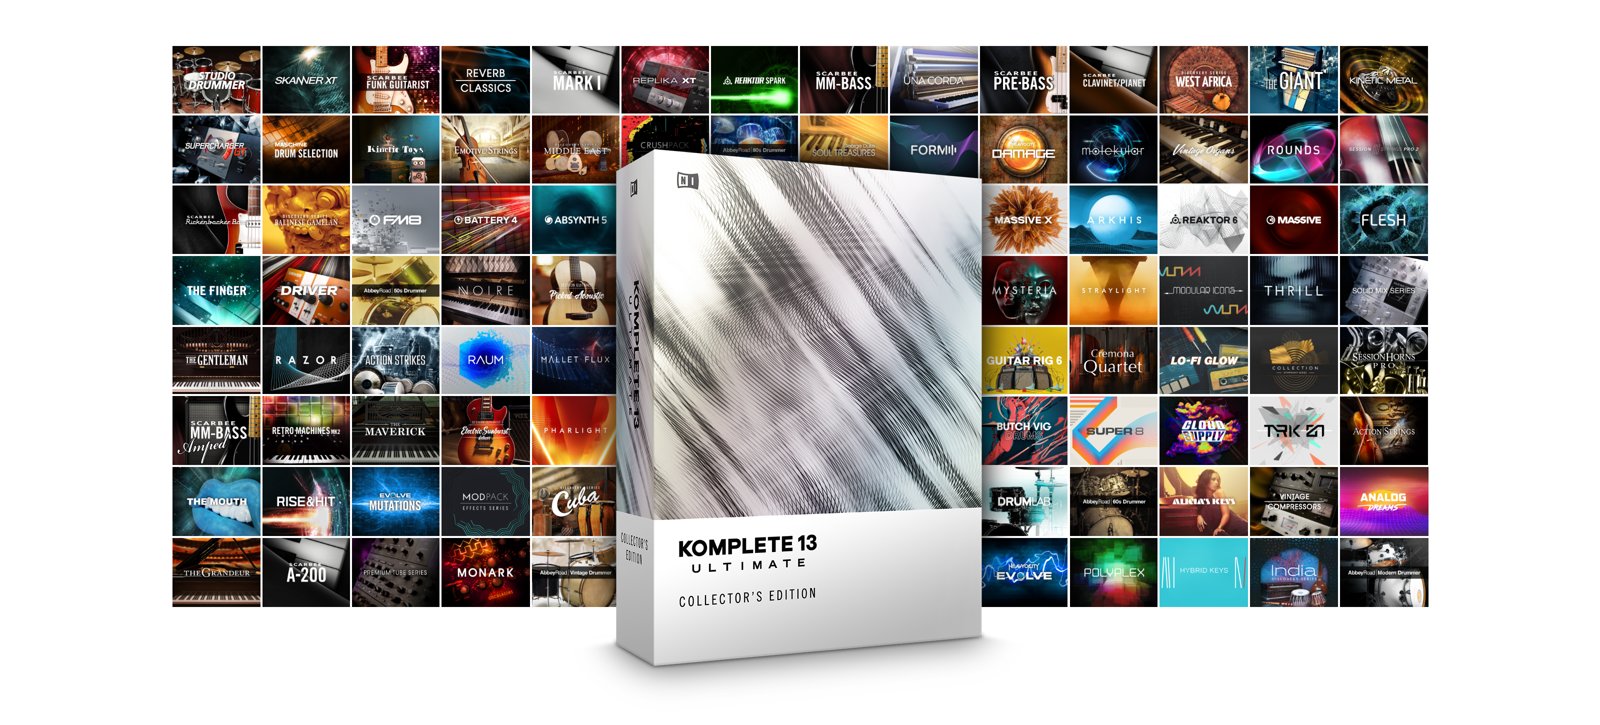 KOMPLETE 13 ULTIMATE Collector's Edition